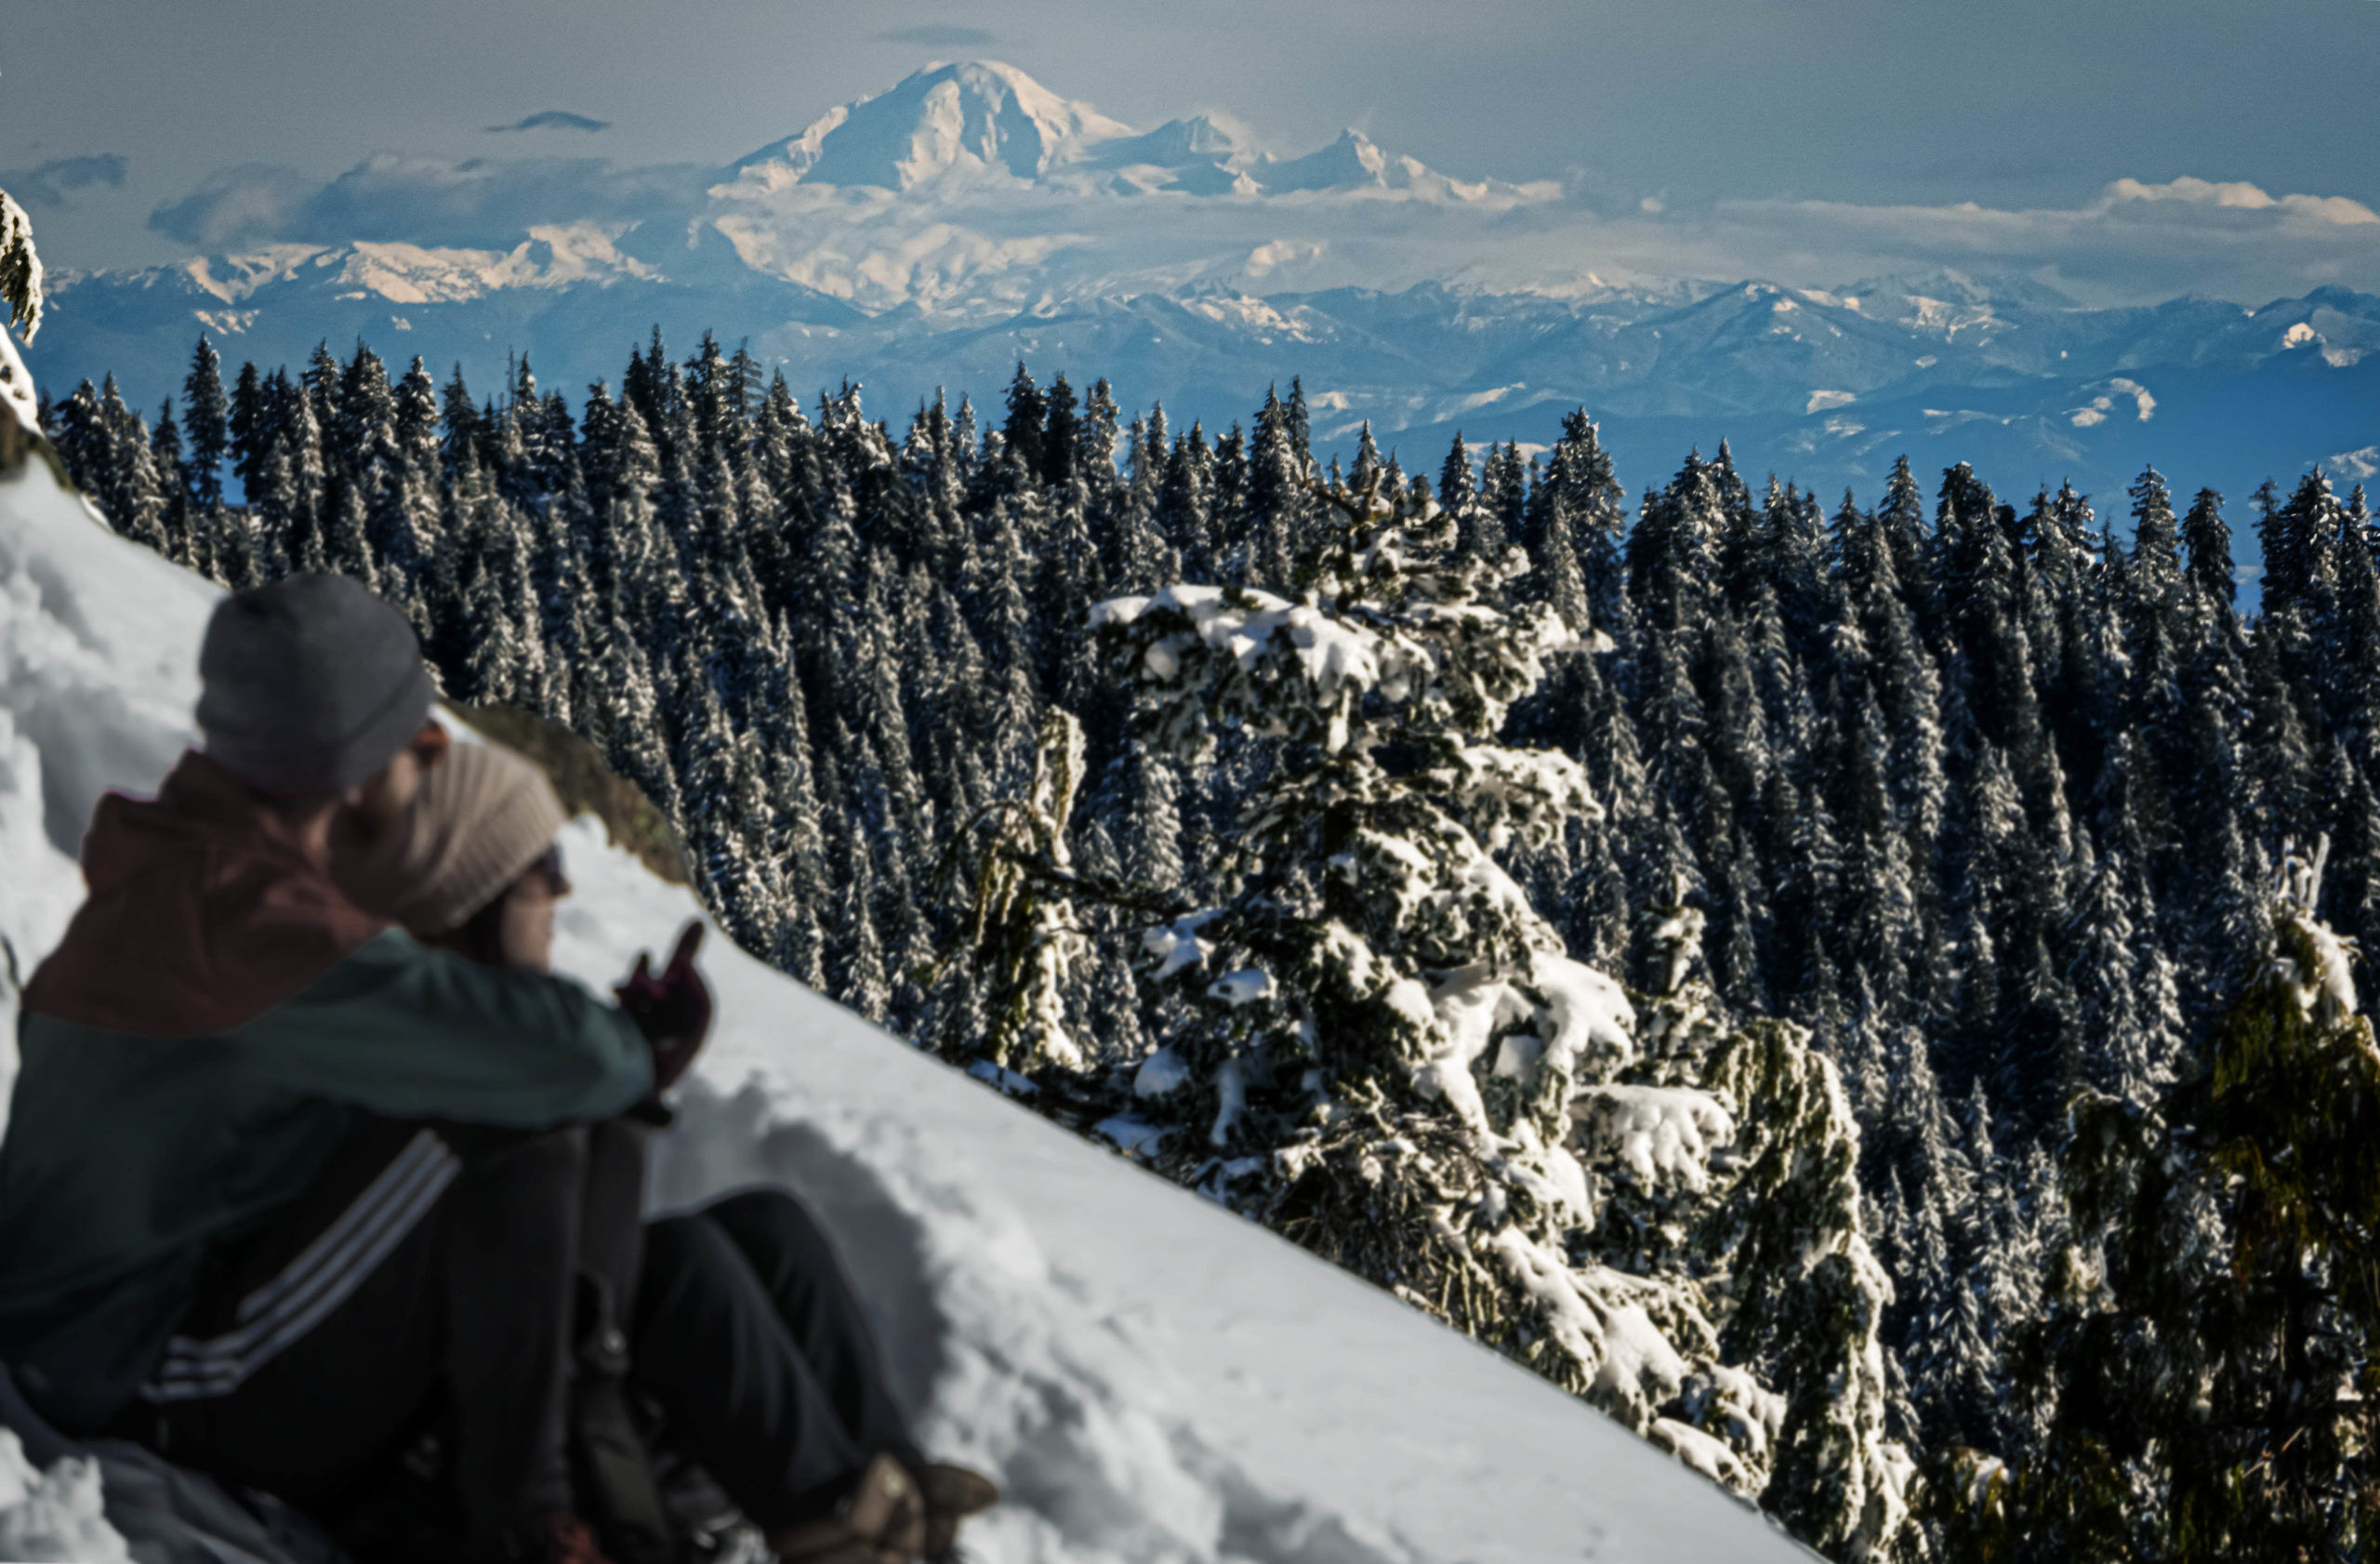 Mount Baker from Dog Mountain in Vancouver, BC, Canada